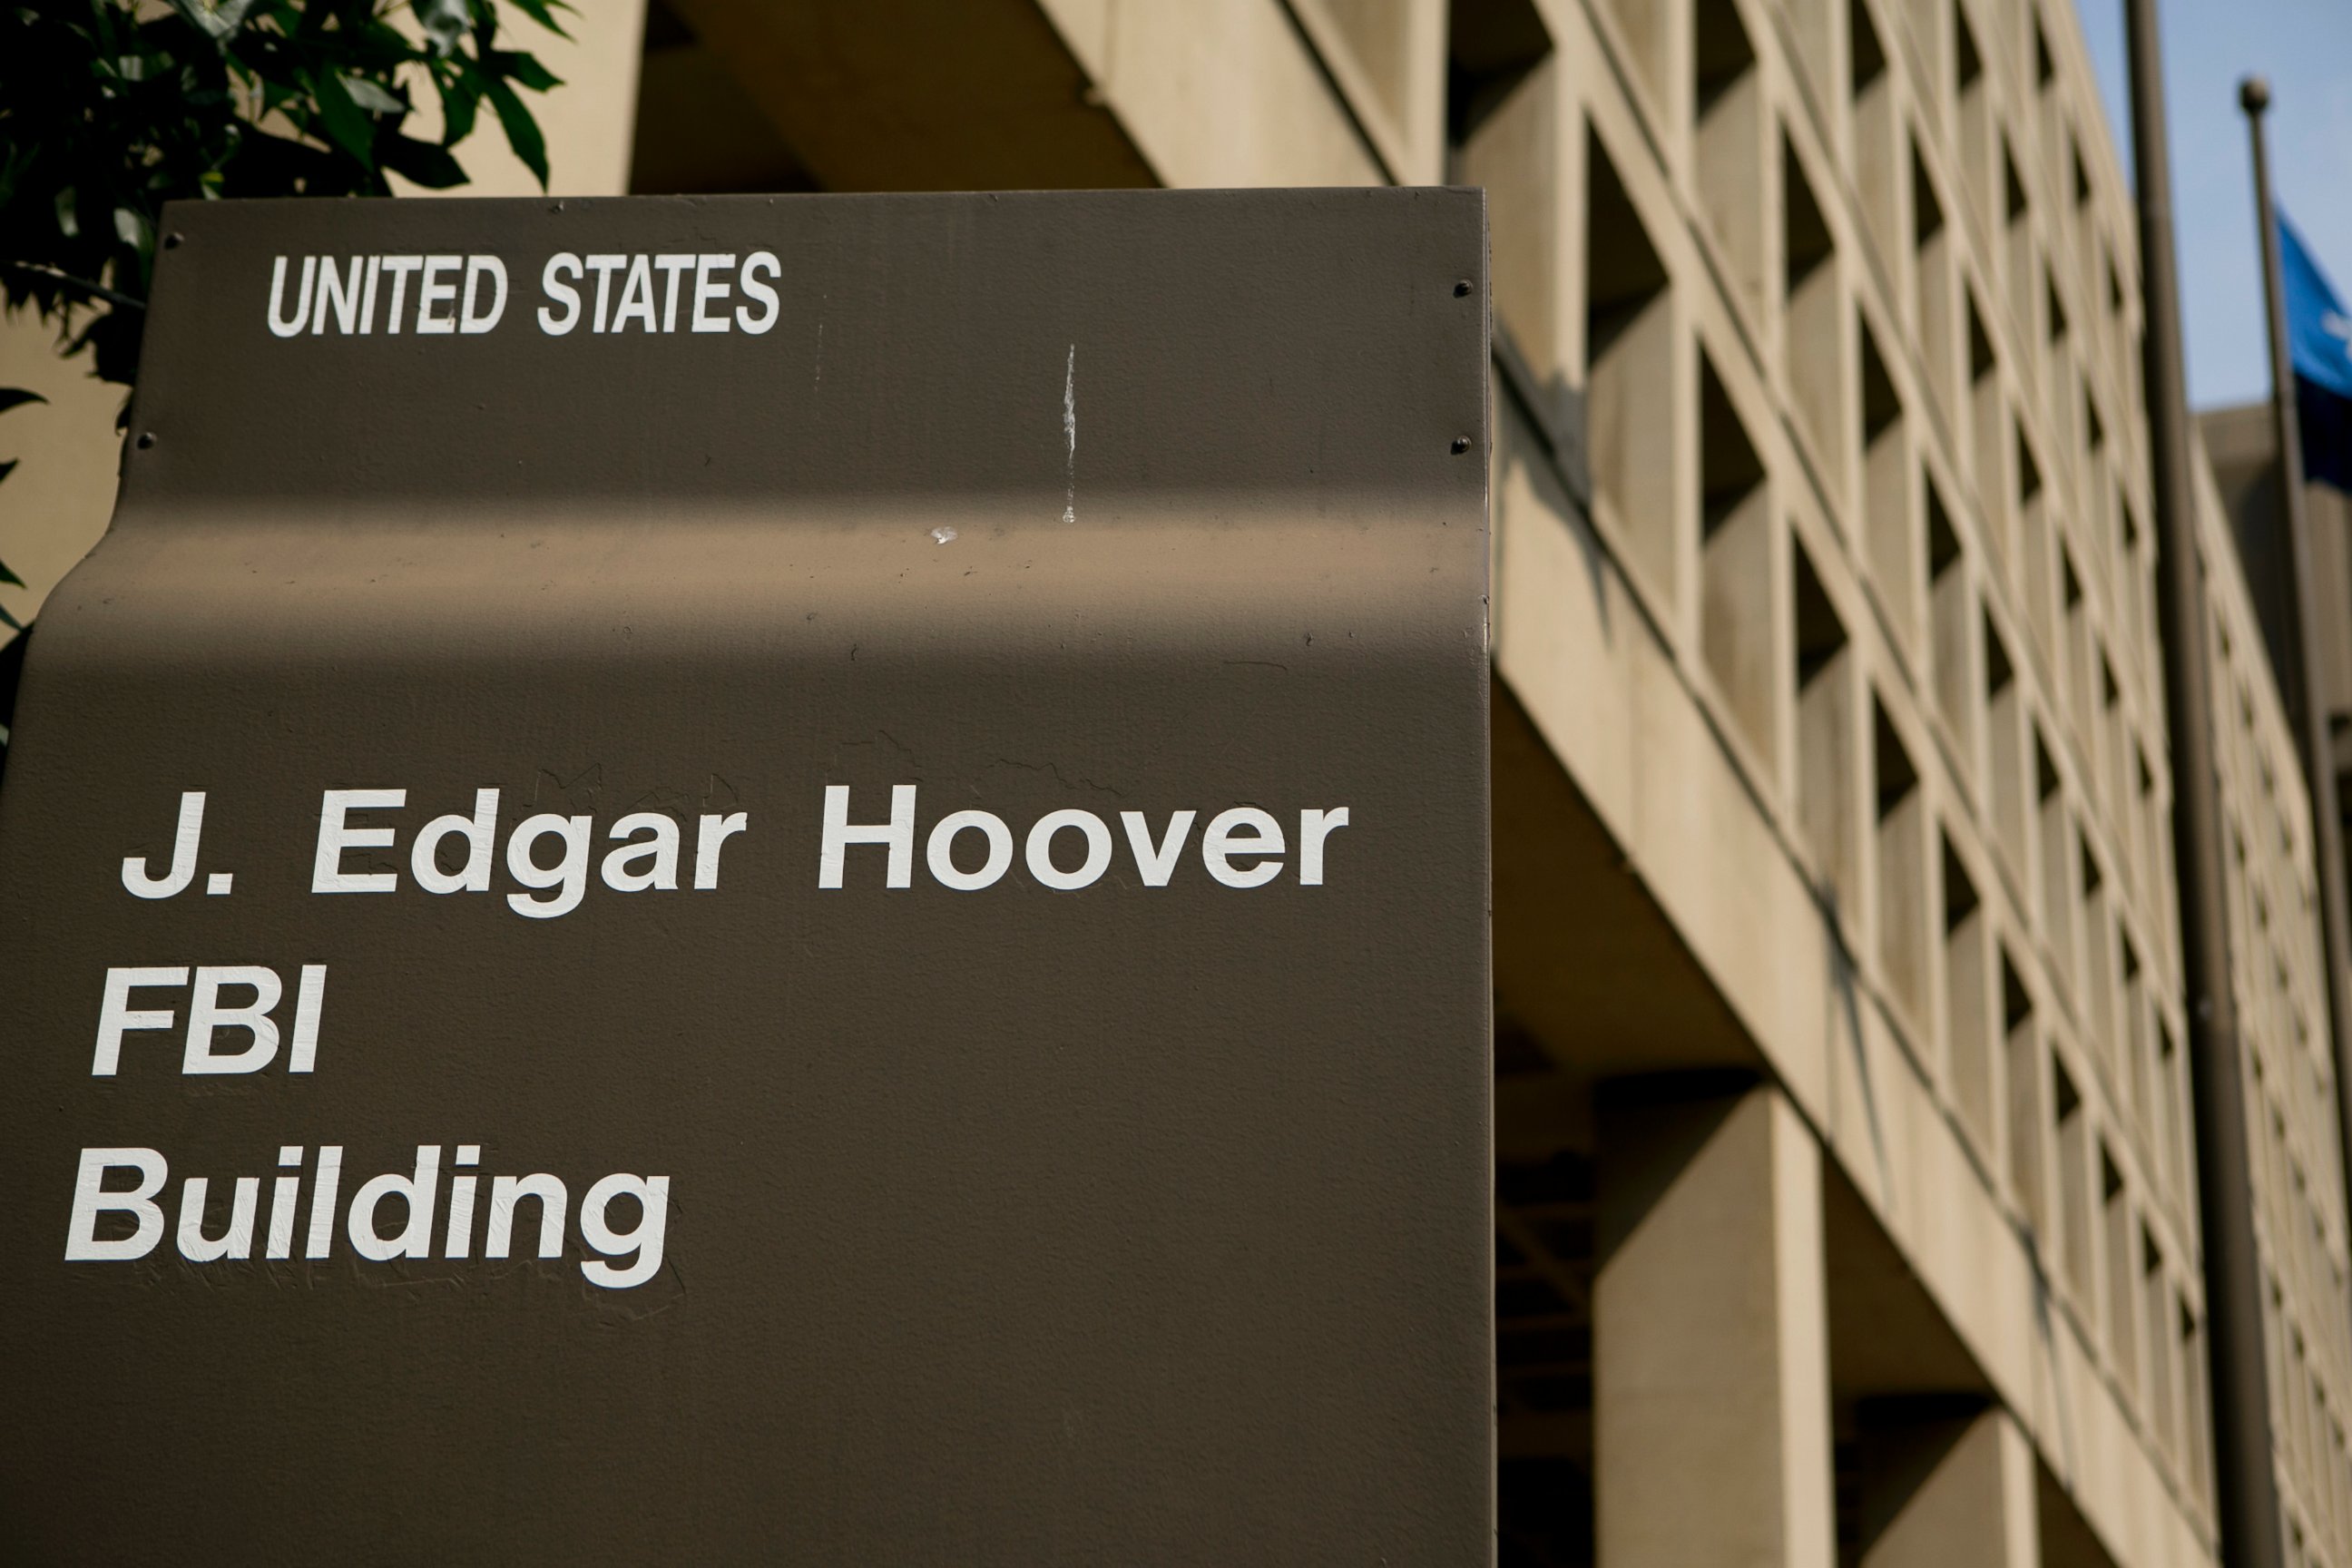 PHOTO: The J. Edgar Hoover Federal Bureau of Investigation building is pictured in Washington, D.C., Aug. 8, 2013.